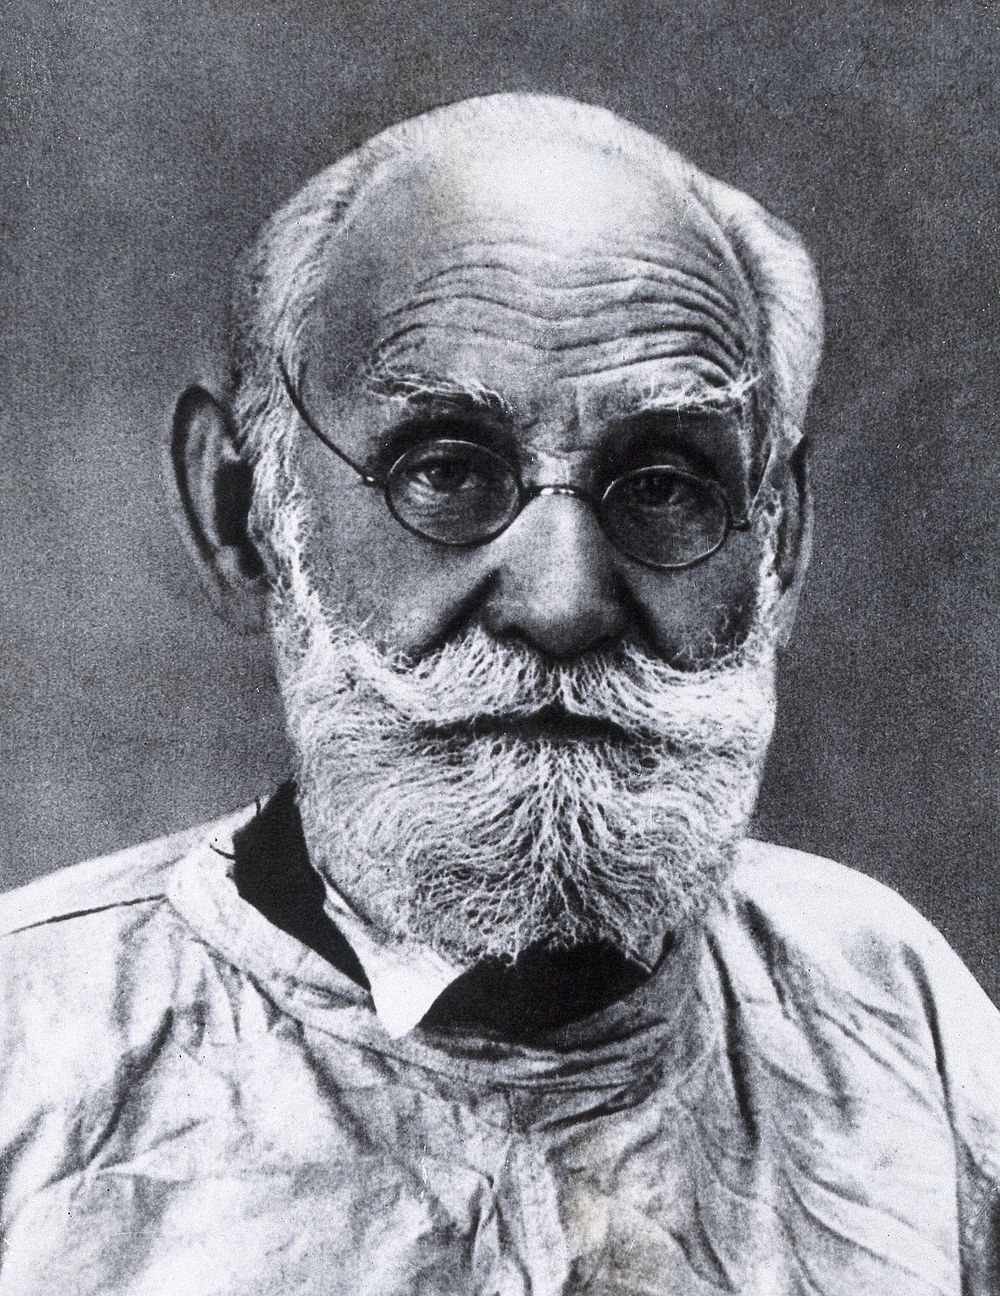 Ivan Petrovitch Pavlov. Photograph after a photograph taken in 1934.